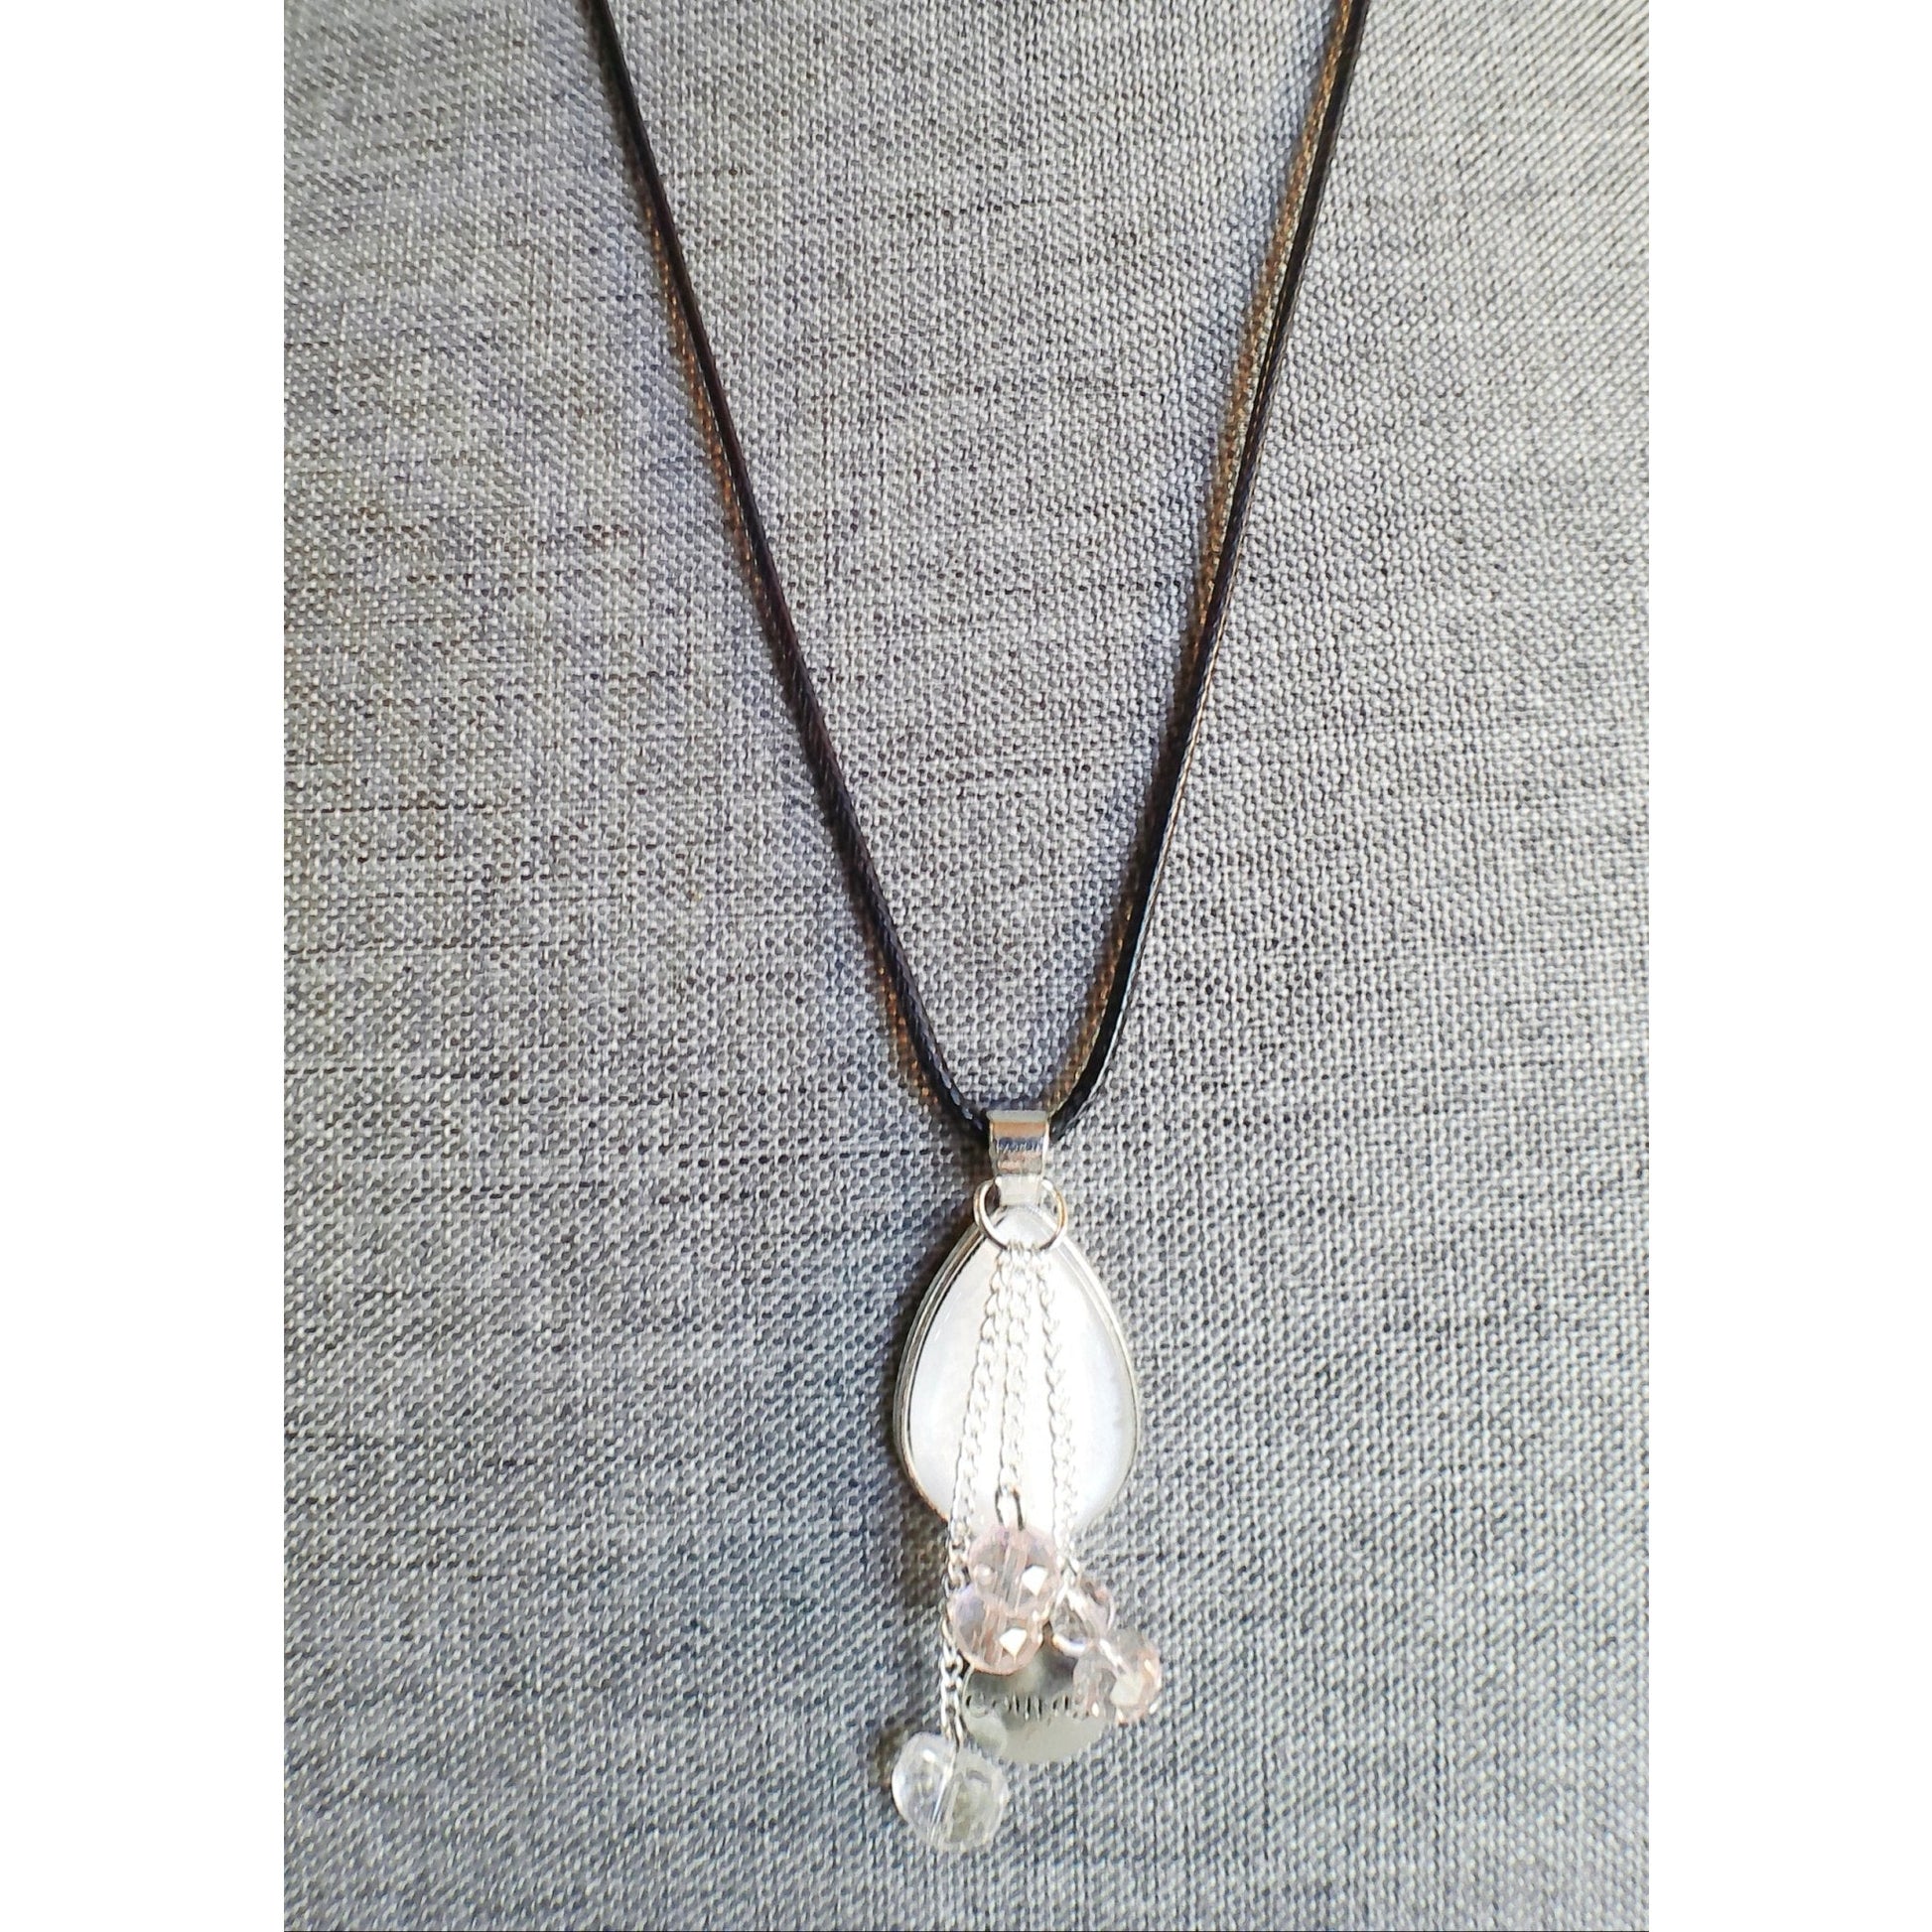 Dewdrop 8 Pendant Necklace - Rhapsody and Renascence